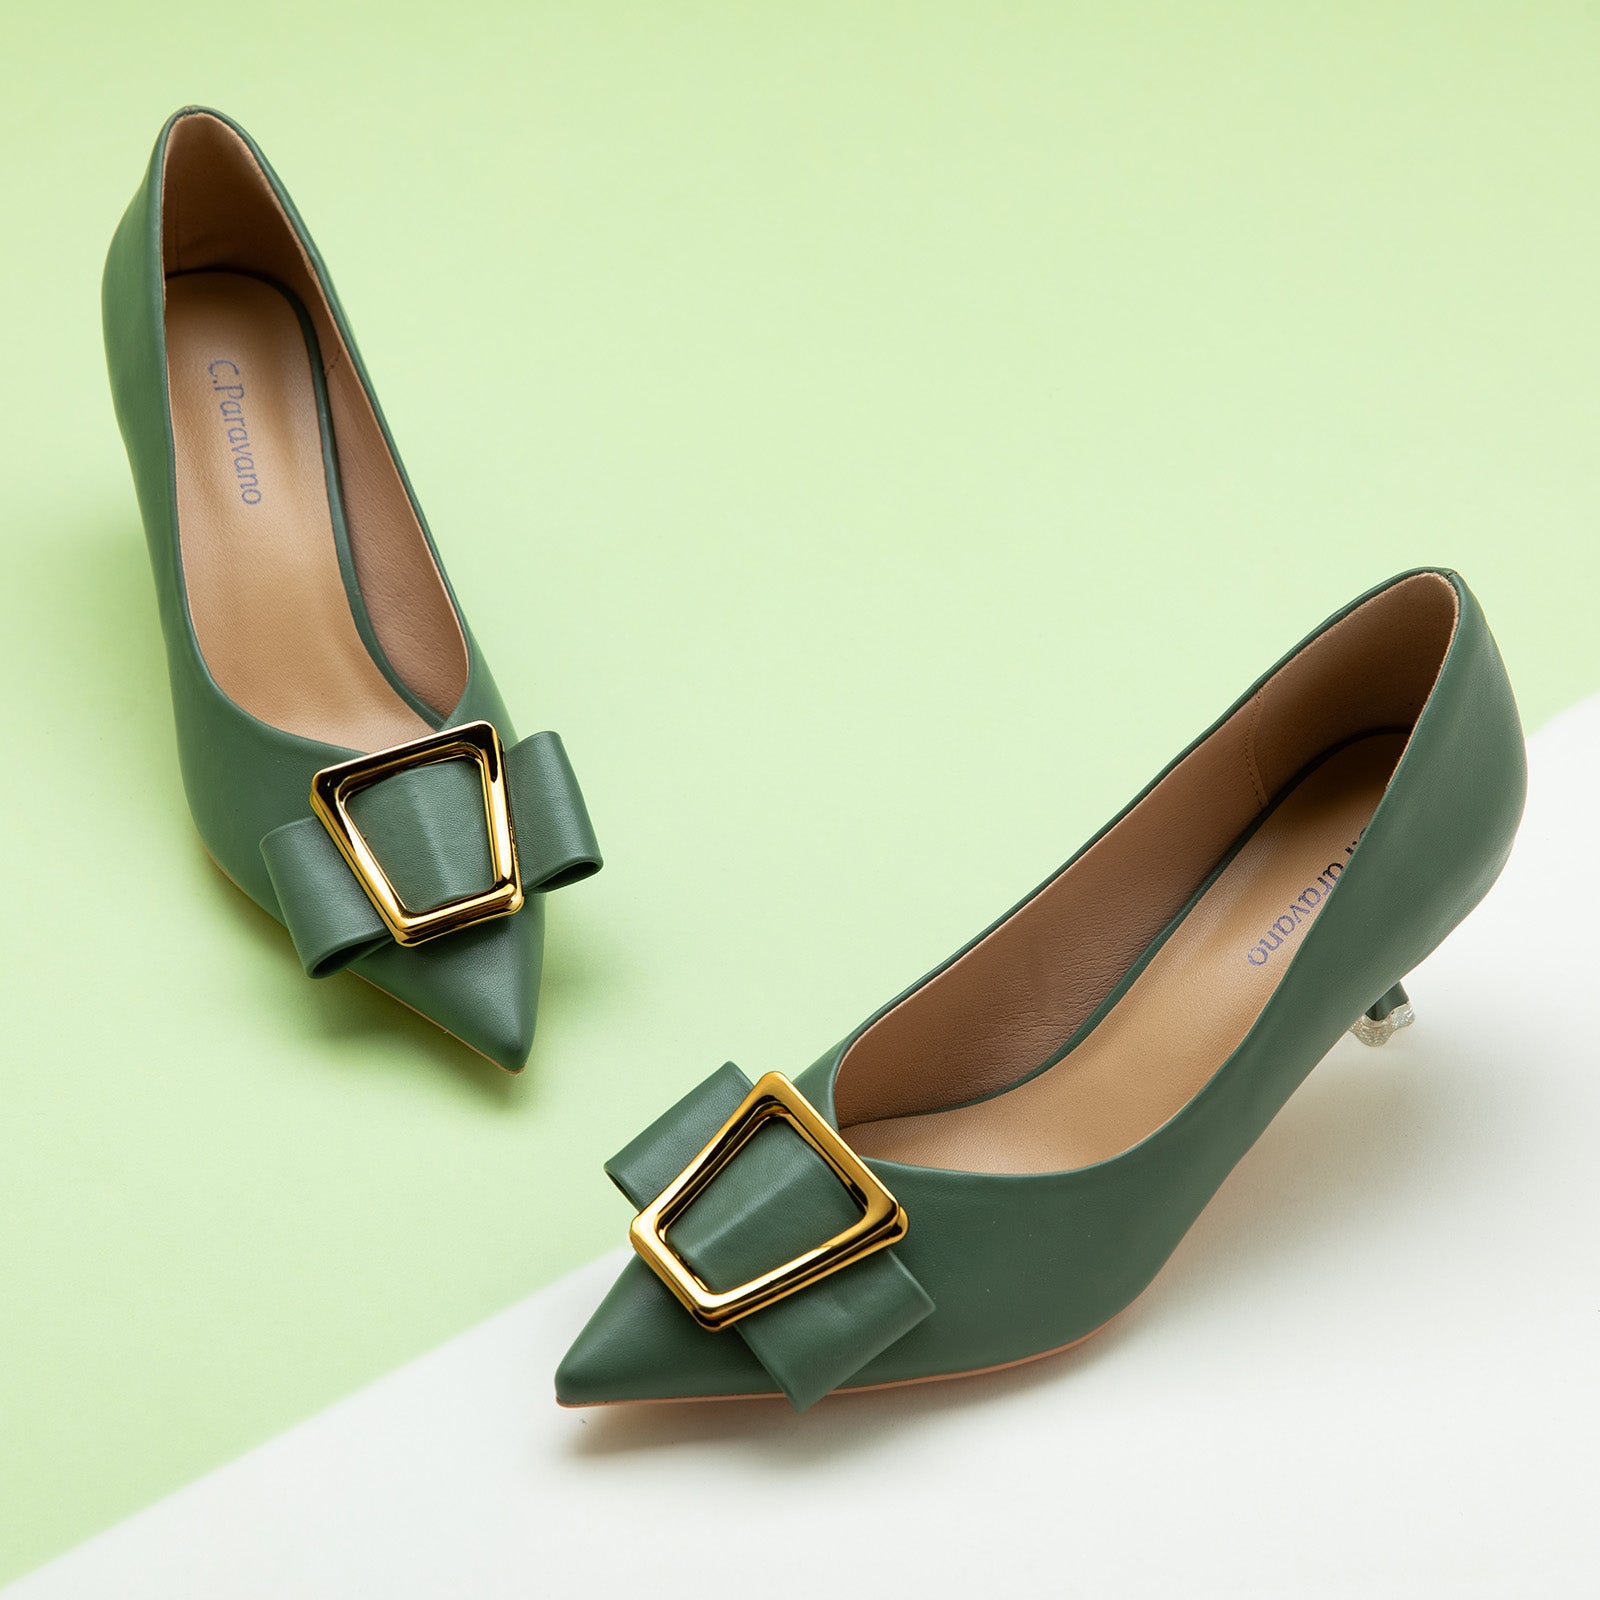 Green Geometric Kitten Heel Women Pumps, a nature-inspired choice for a chic and modern look